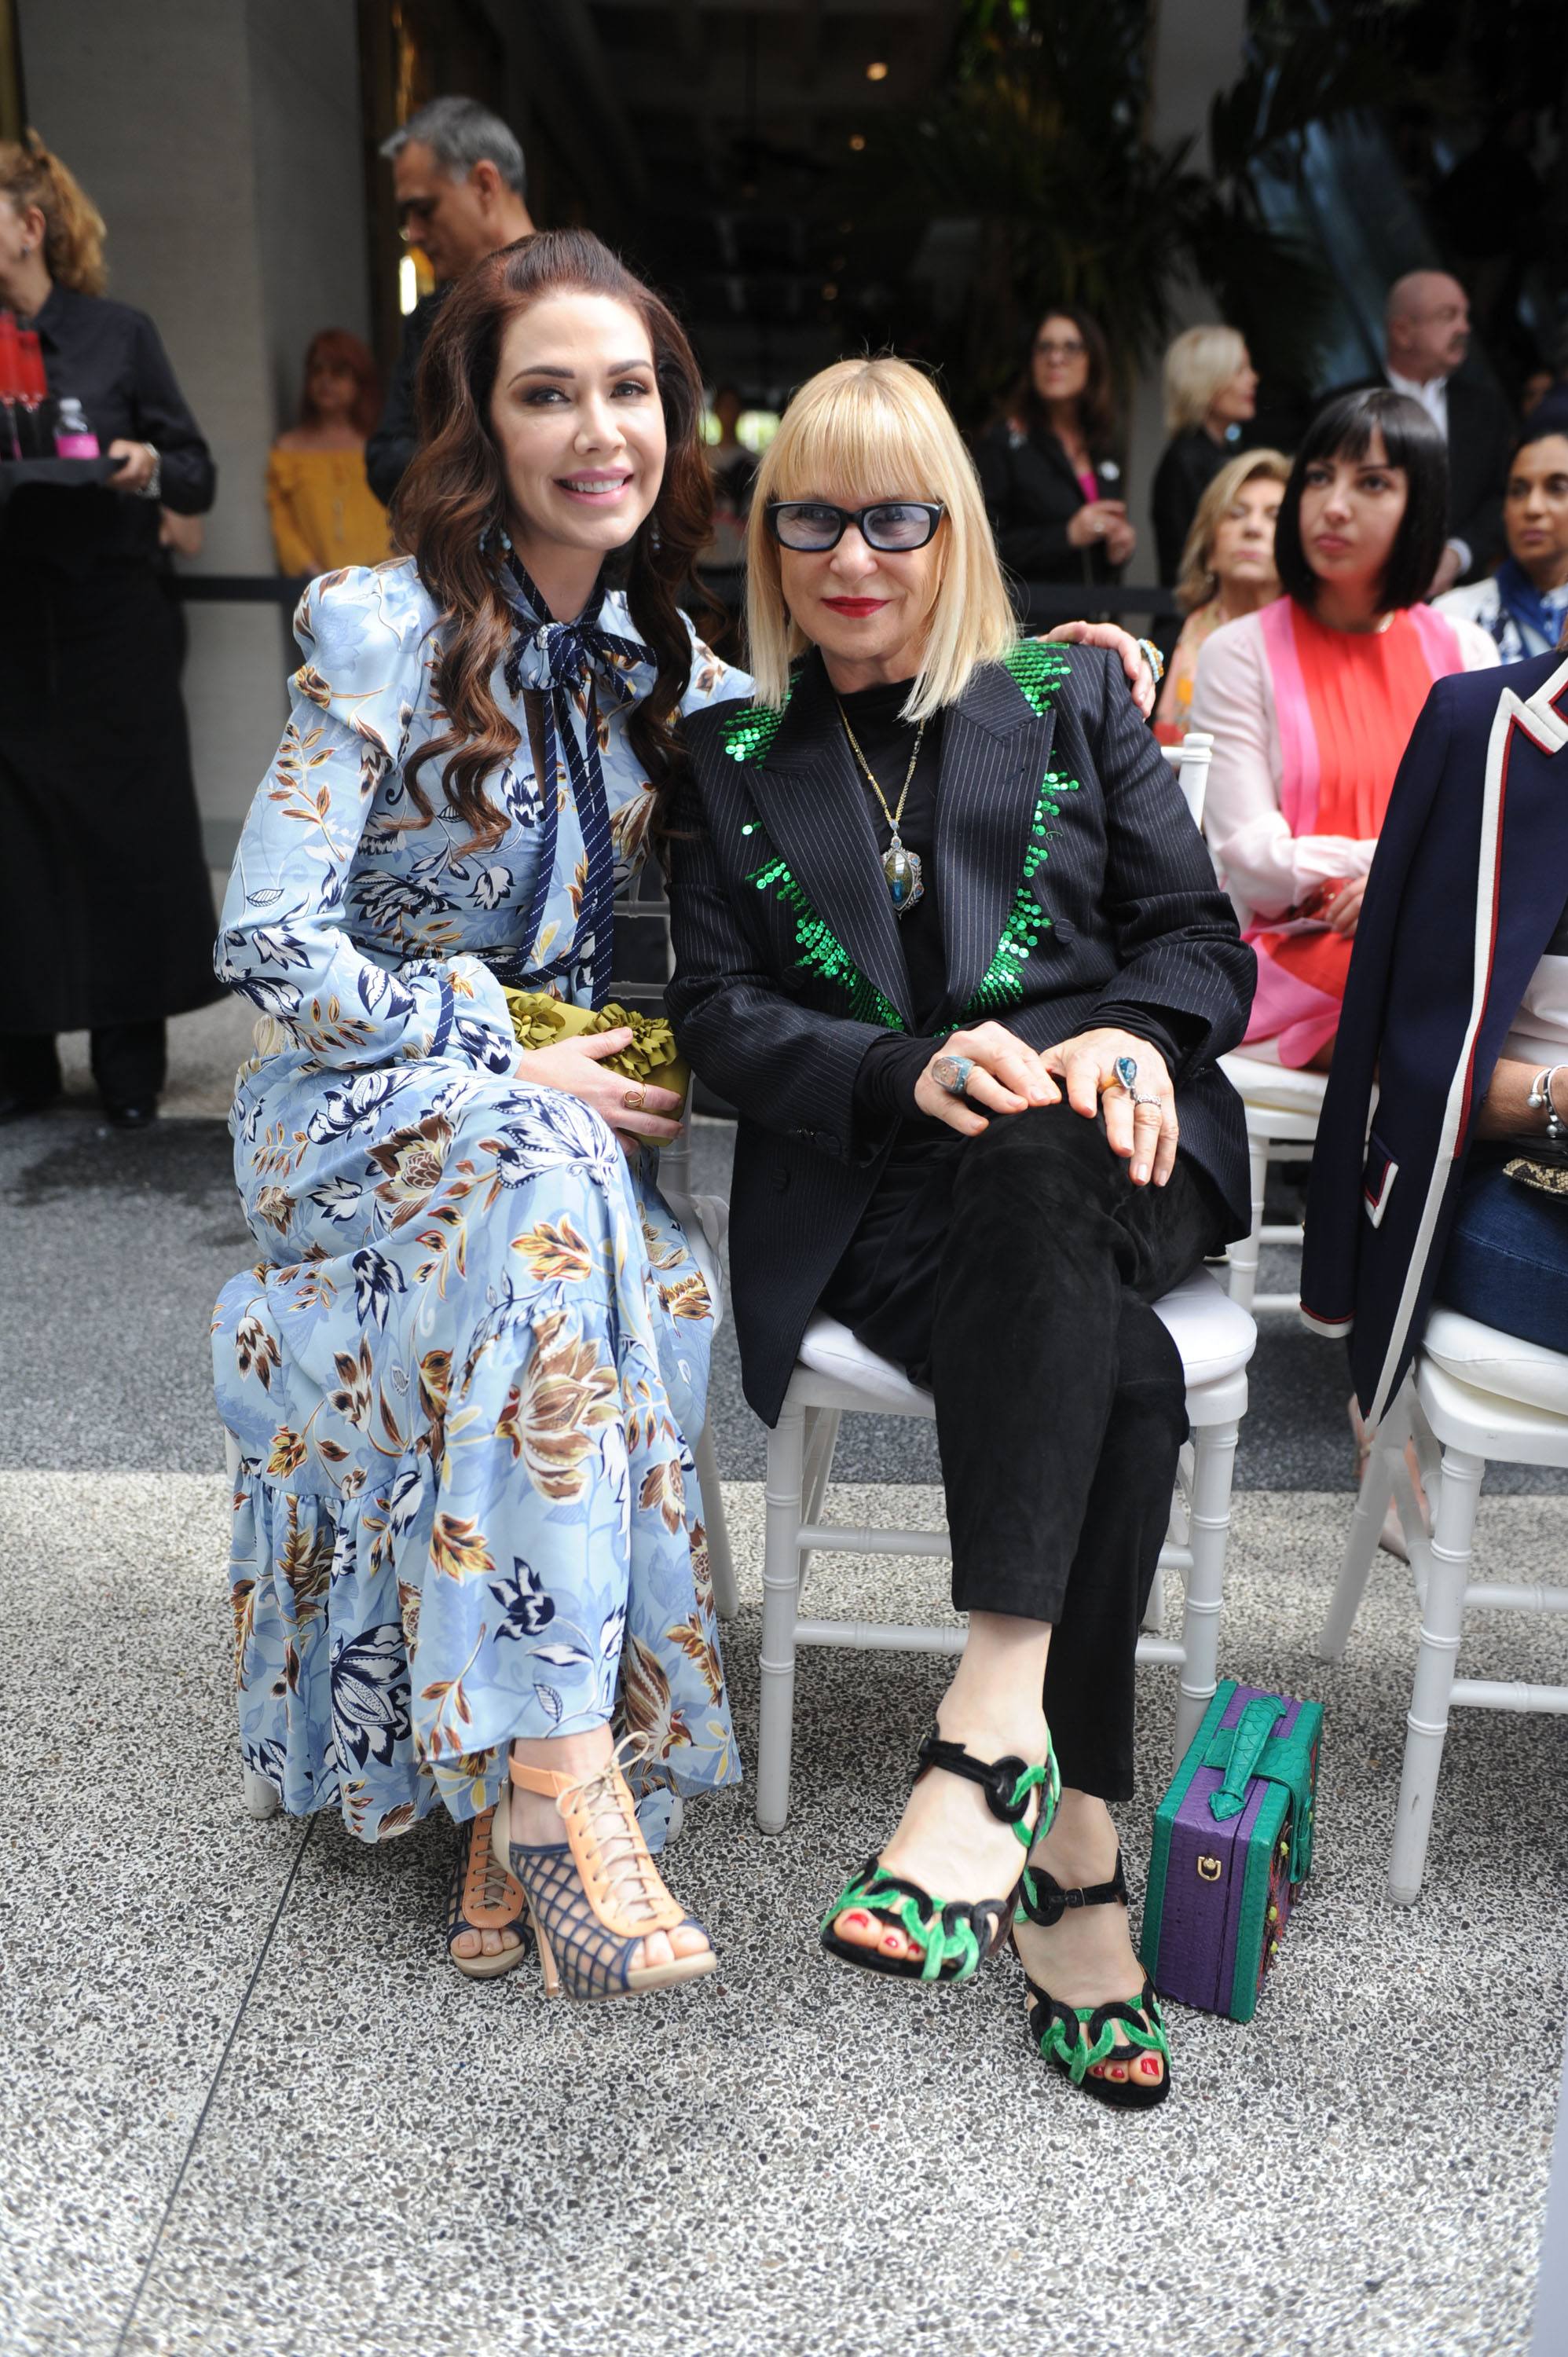 Guests Shireen Sandoval & Elysze Held sit front row during fashion show